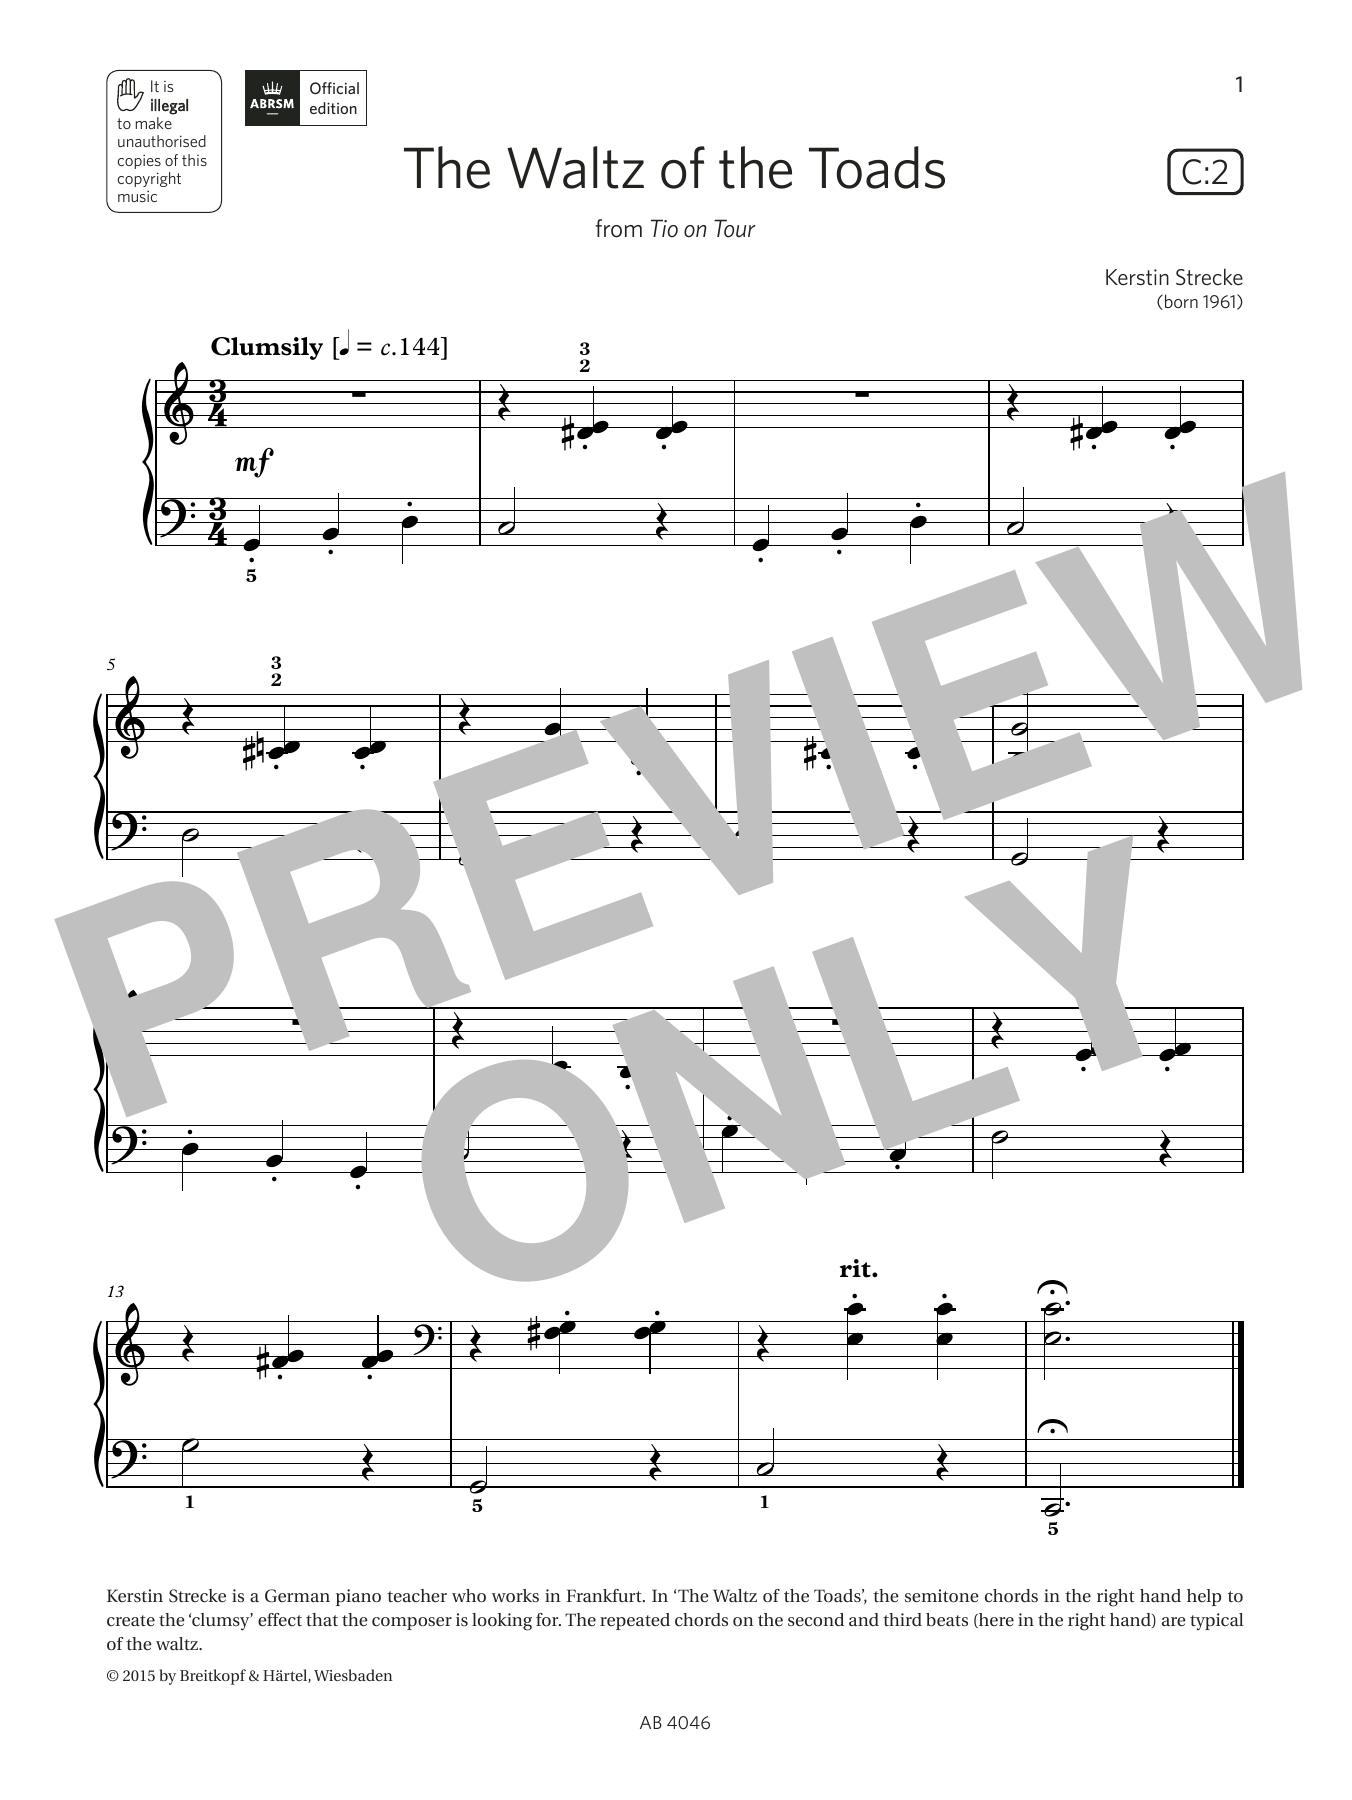 Download Kerstin Strecke The Waltz of the Toads (Grade Initial, Sheet Music